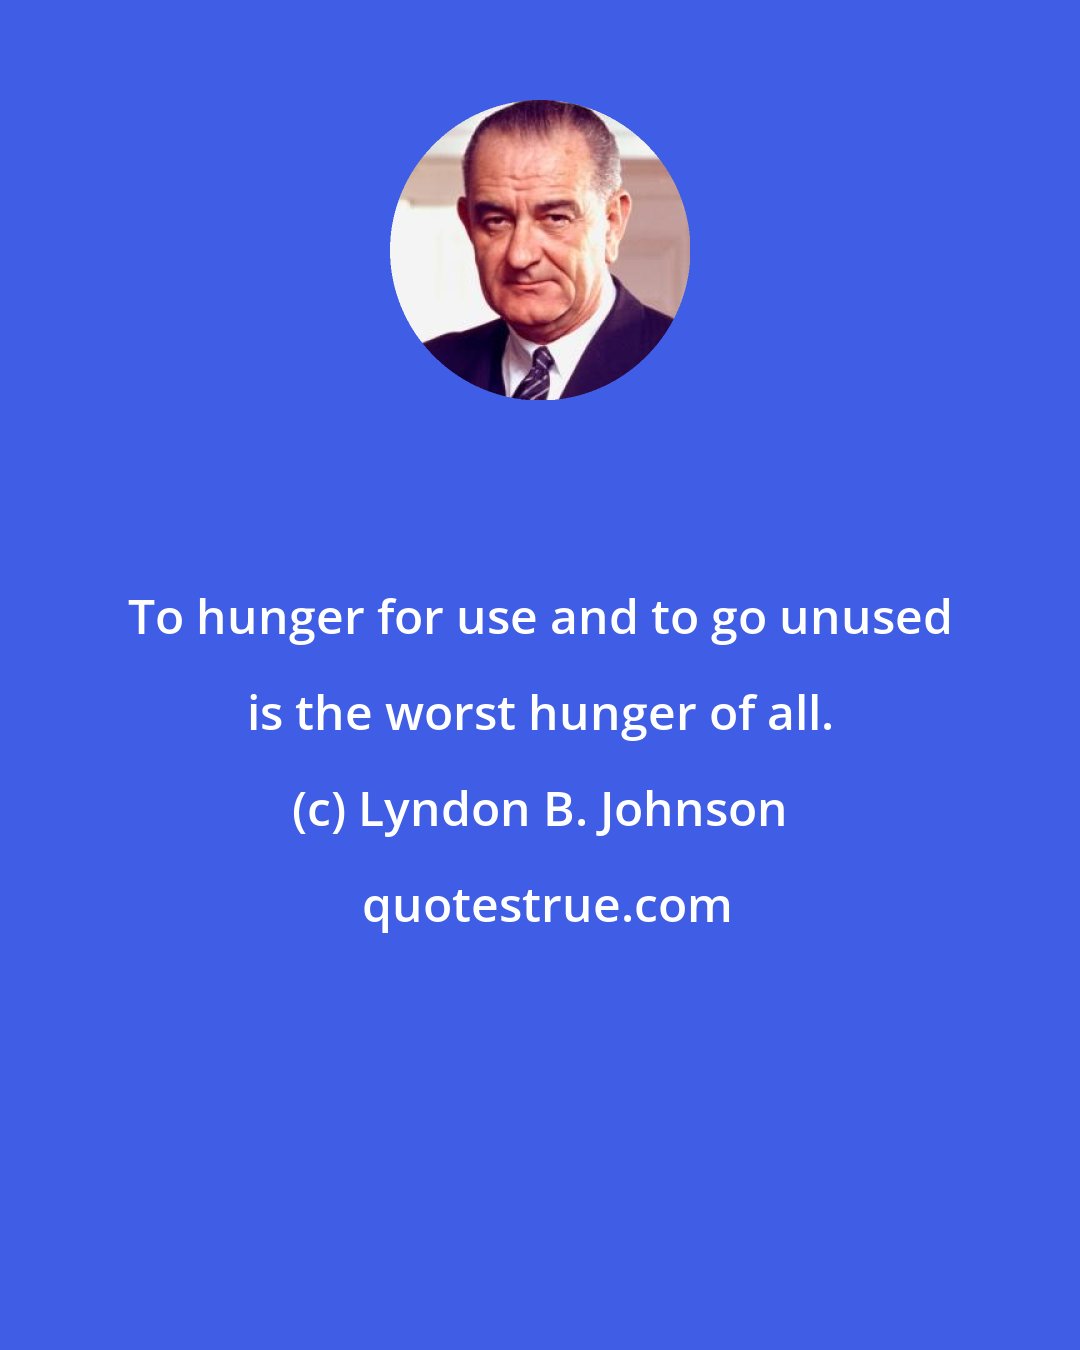 Lyndon B. Johnson: To hunger for use and to go unused is the worst hunger of all.